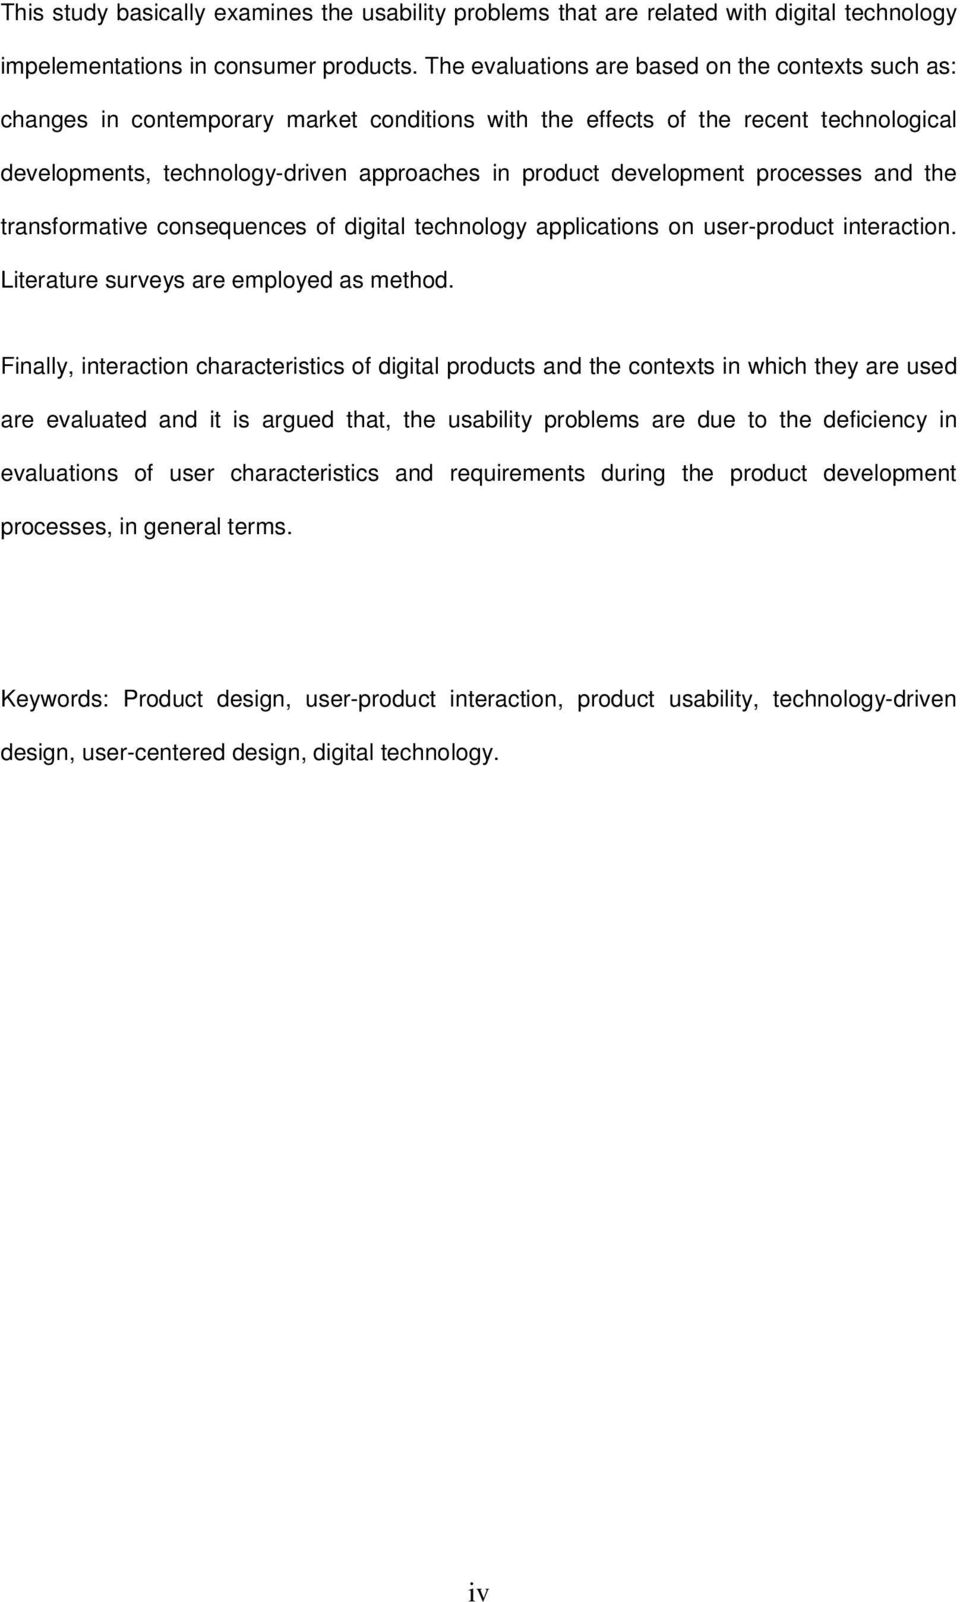 development processes and the transformative consequences of digital technology applications on user-product interaction. Literature surveys are employed as method.